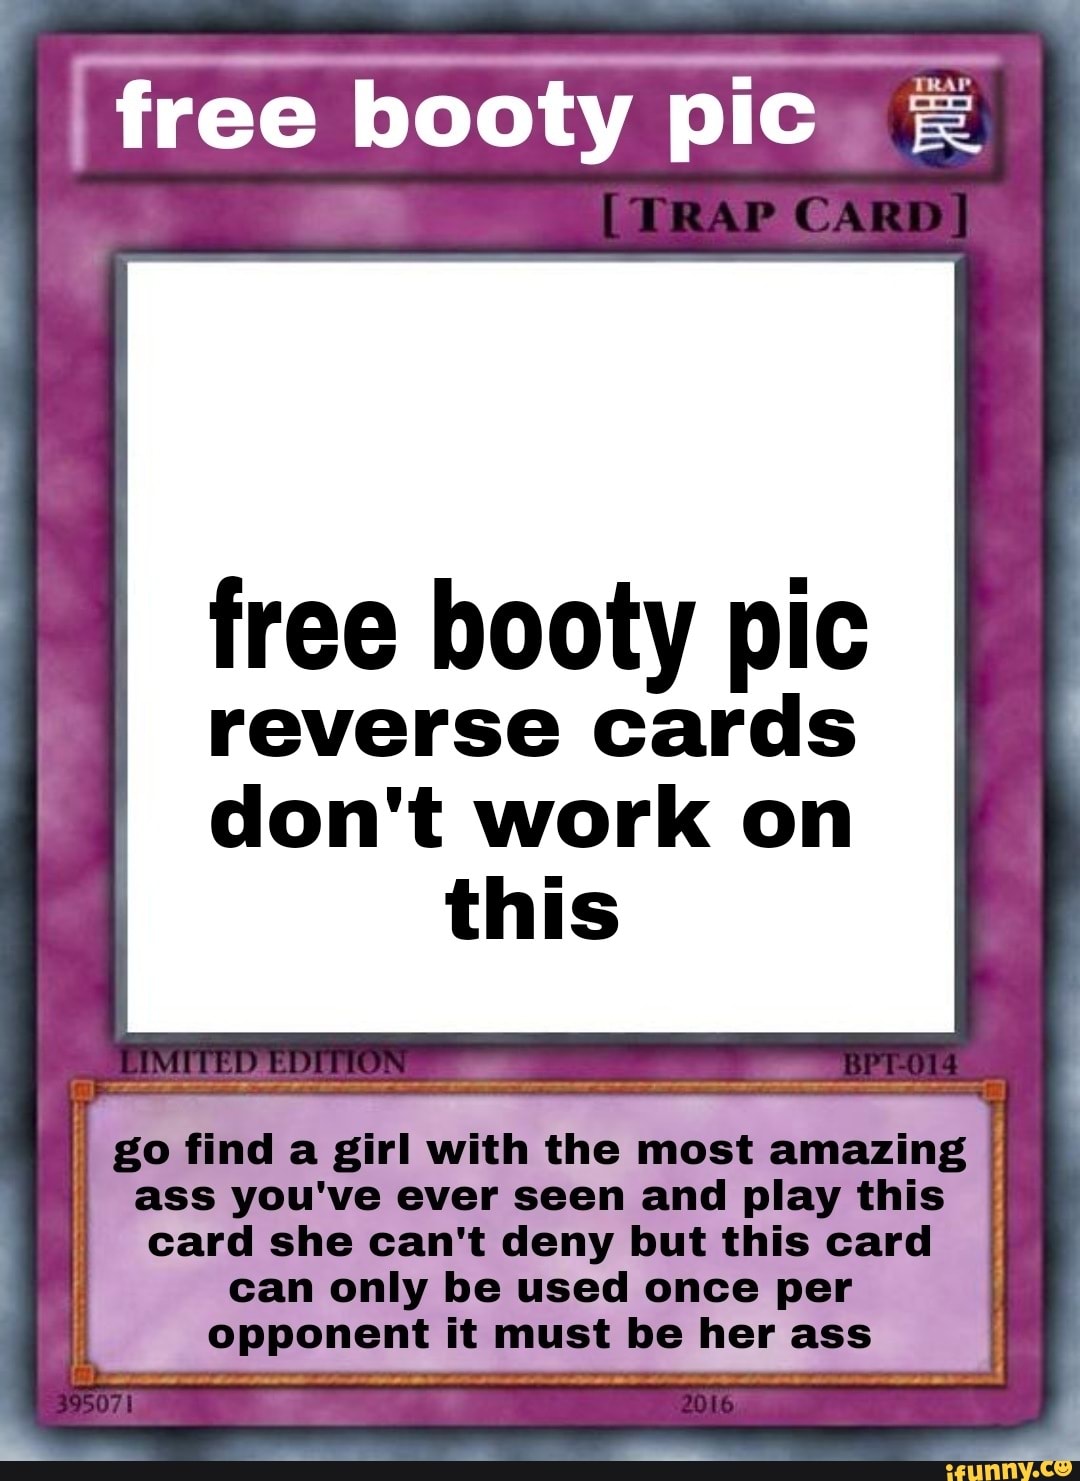 1 free ass pic card